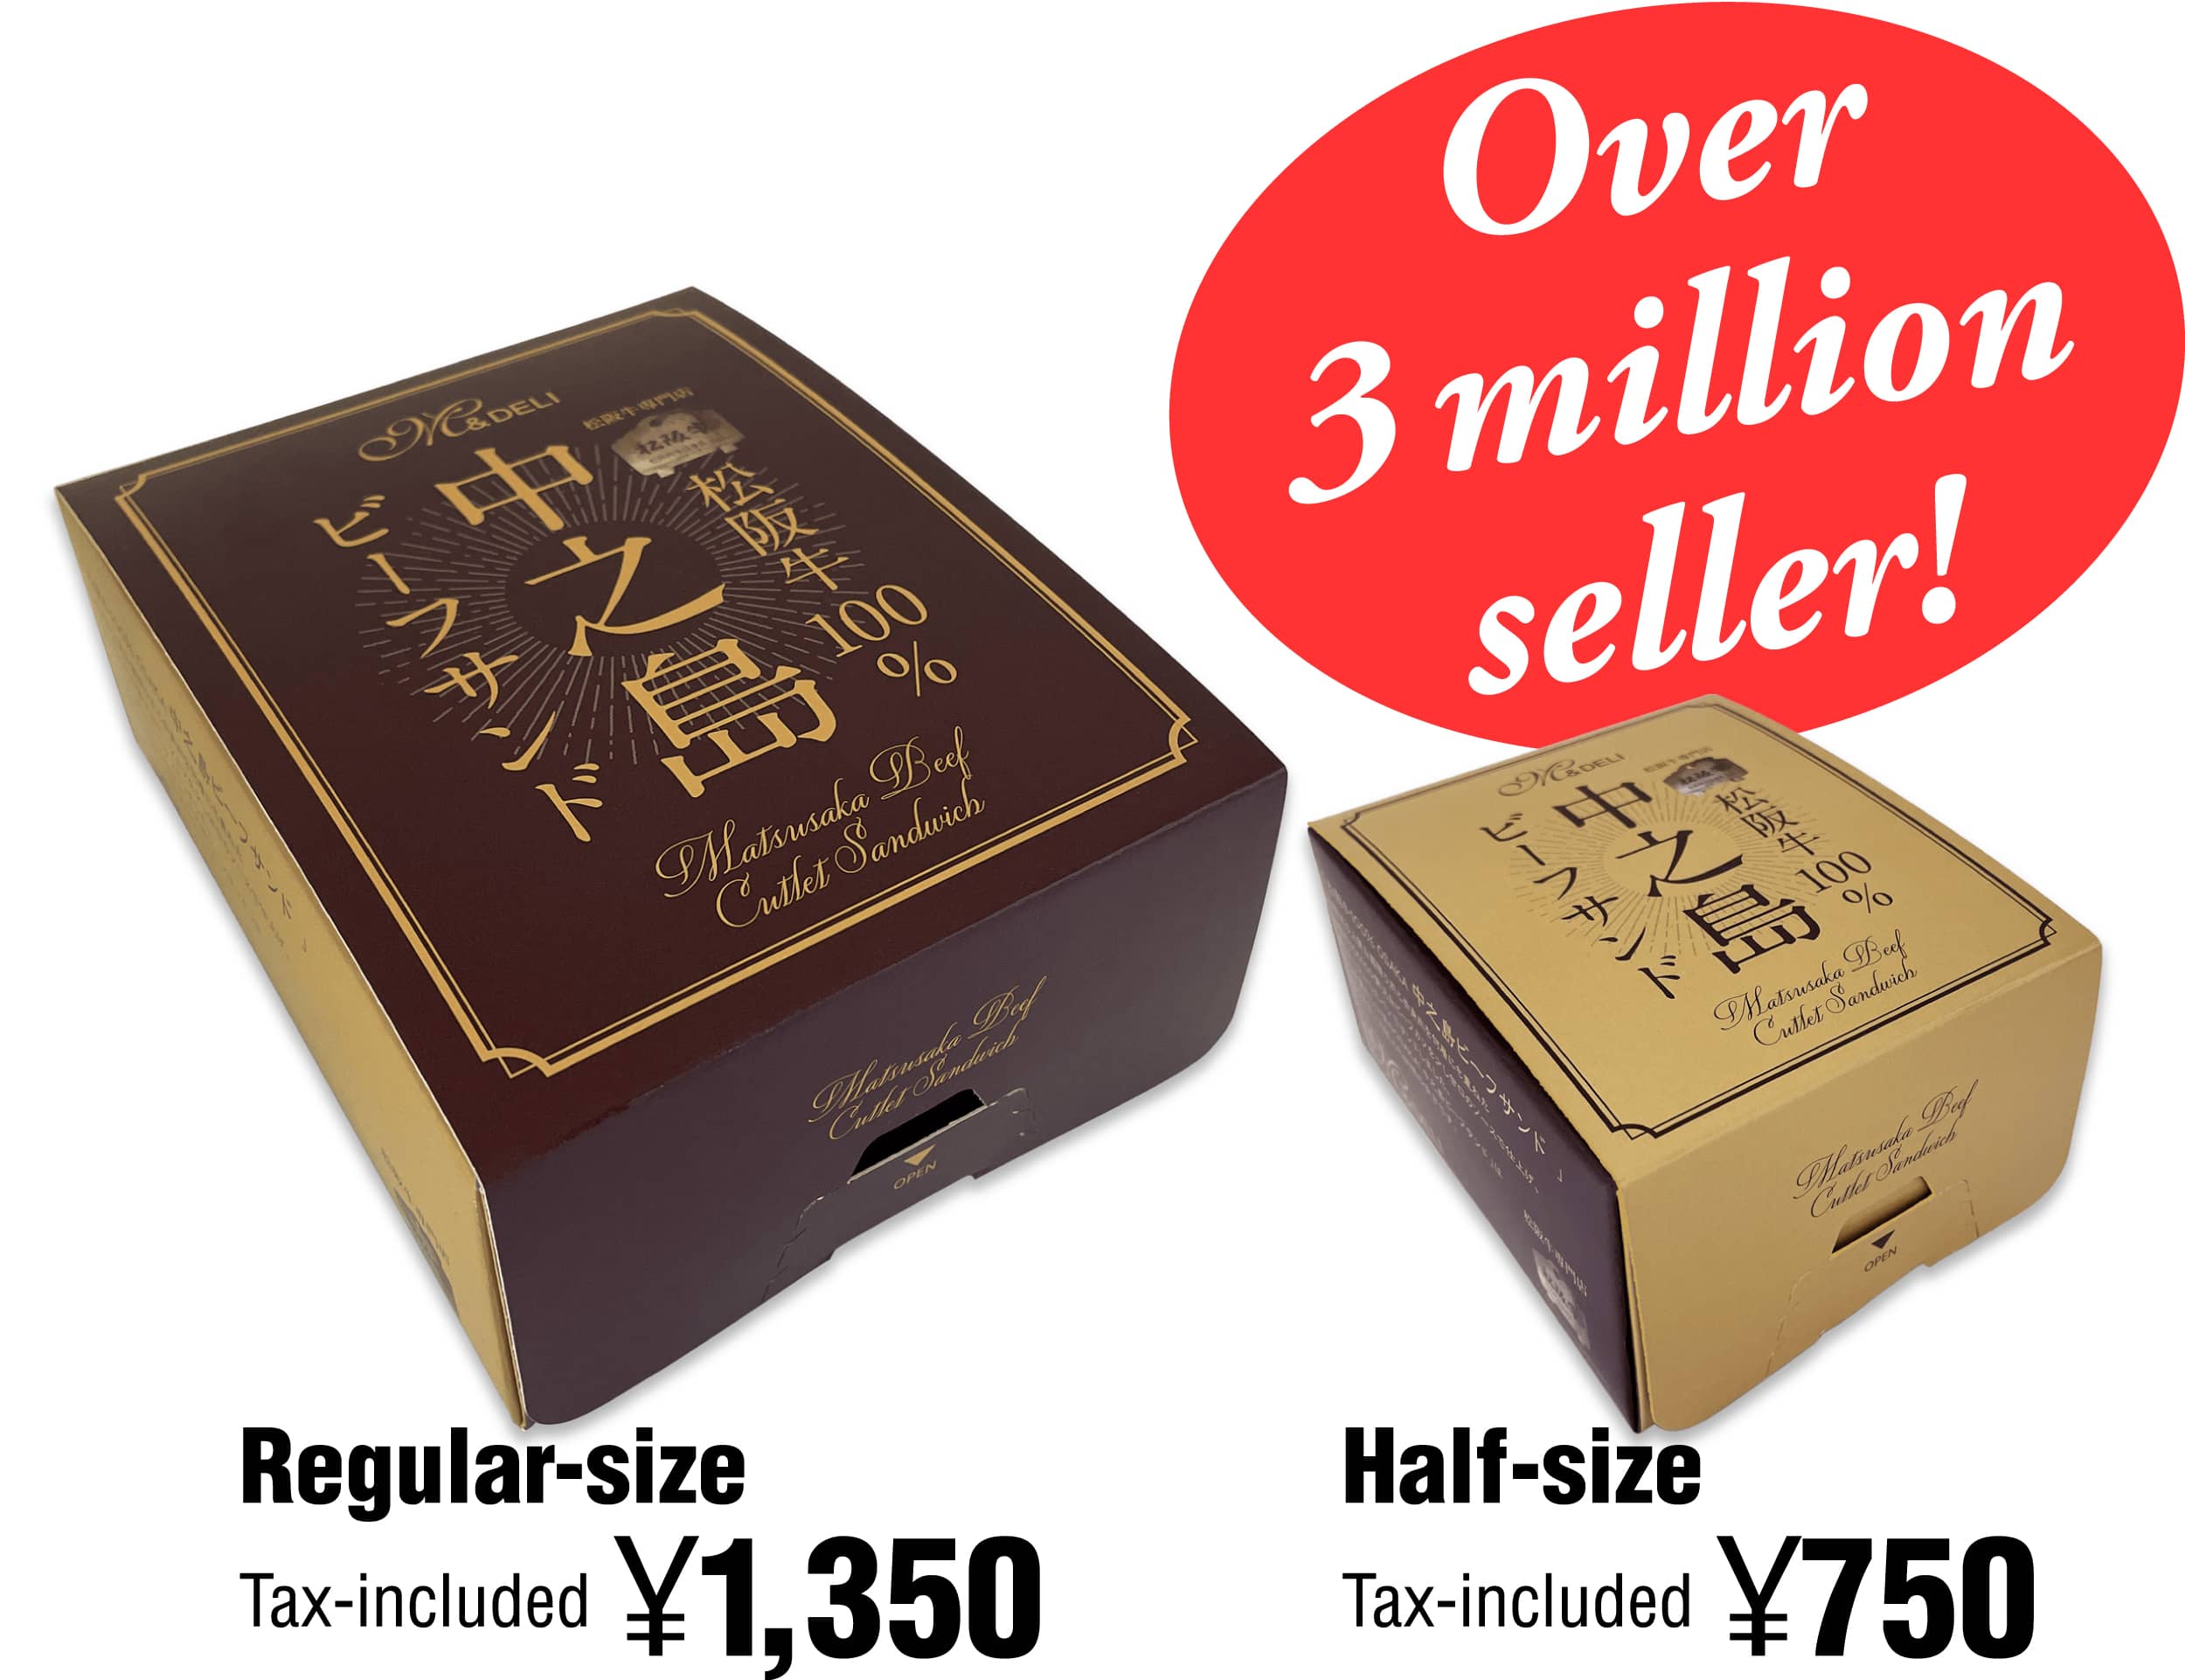 Over 3million seller!　Regular-size Tax-included ¥1,350 half-size Tax-included ¥750 